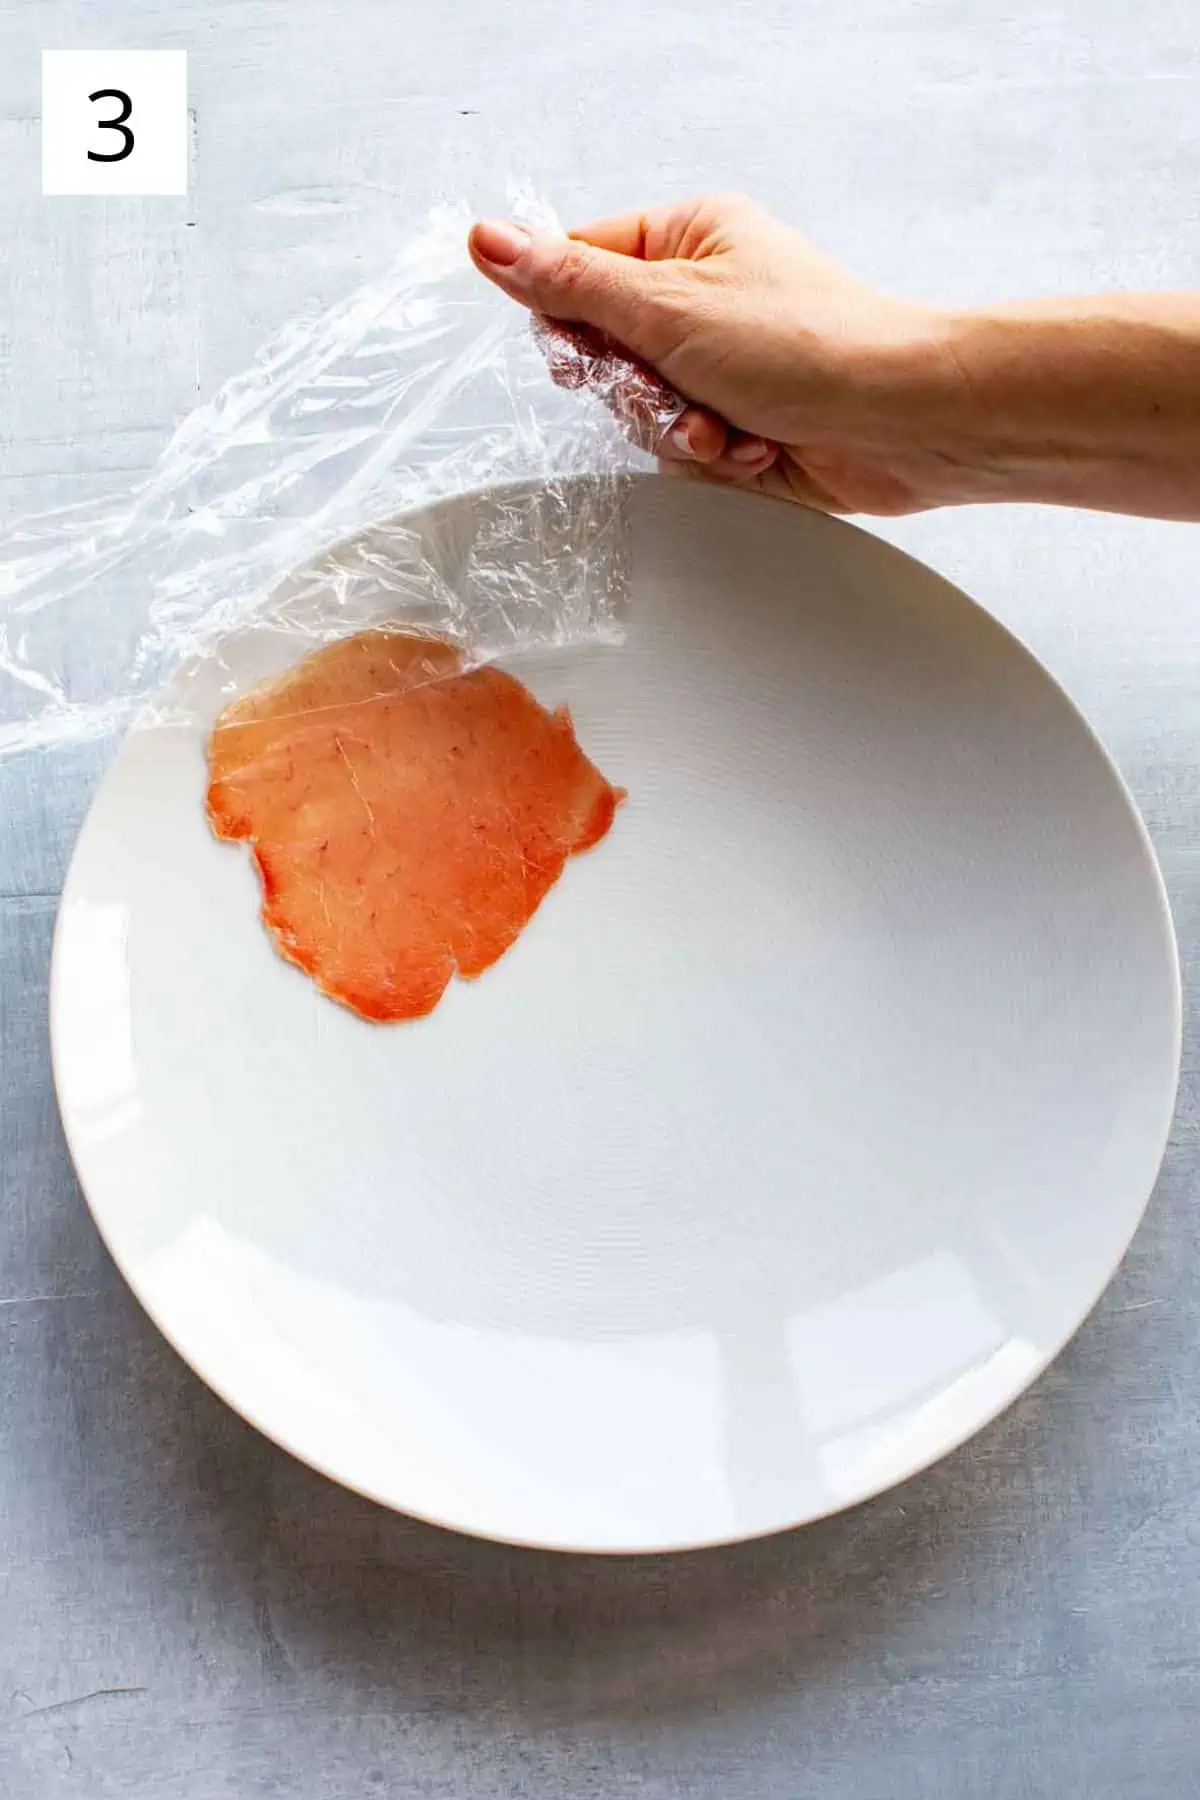 A hand removing plastic wrap from a thin slice of raw tuna on a white plate.